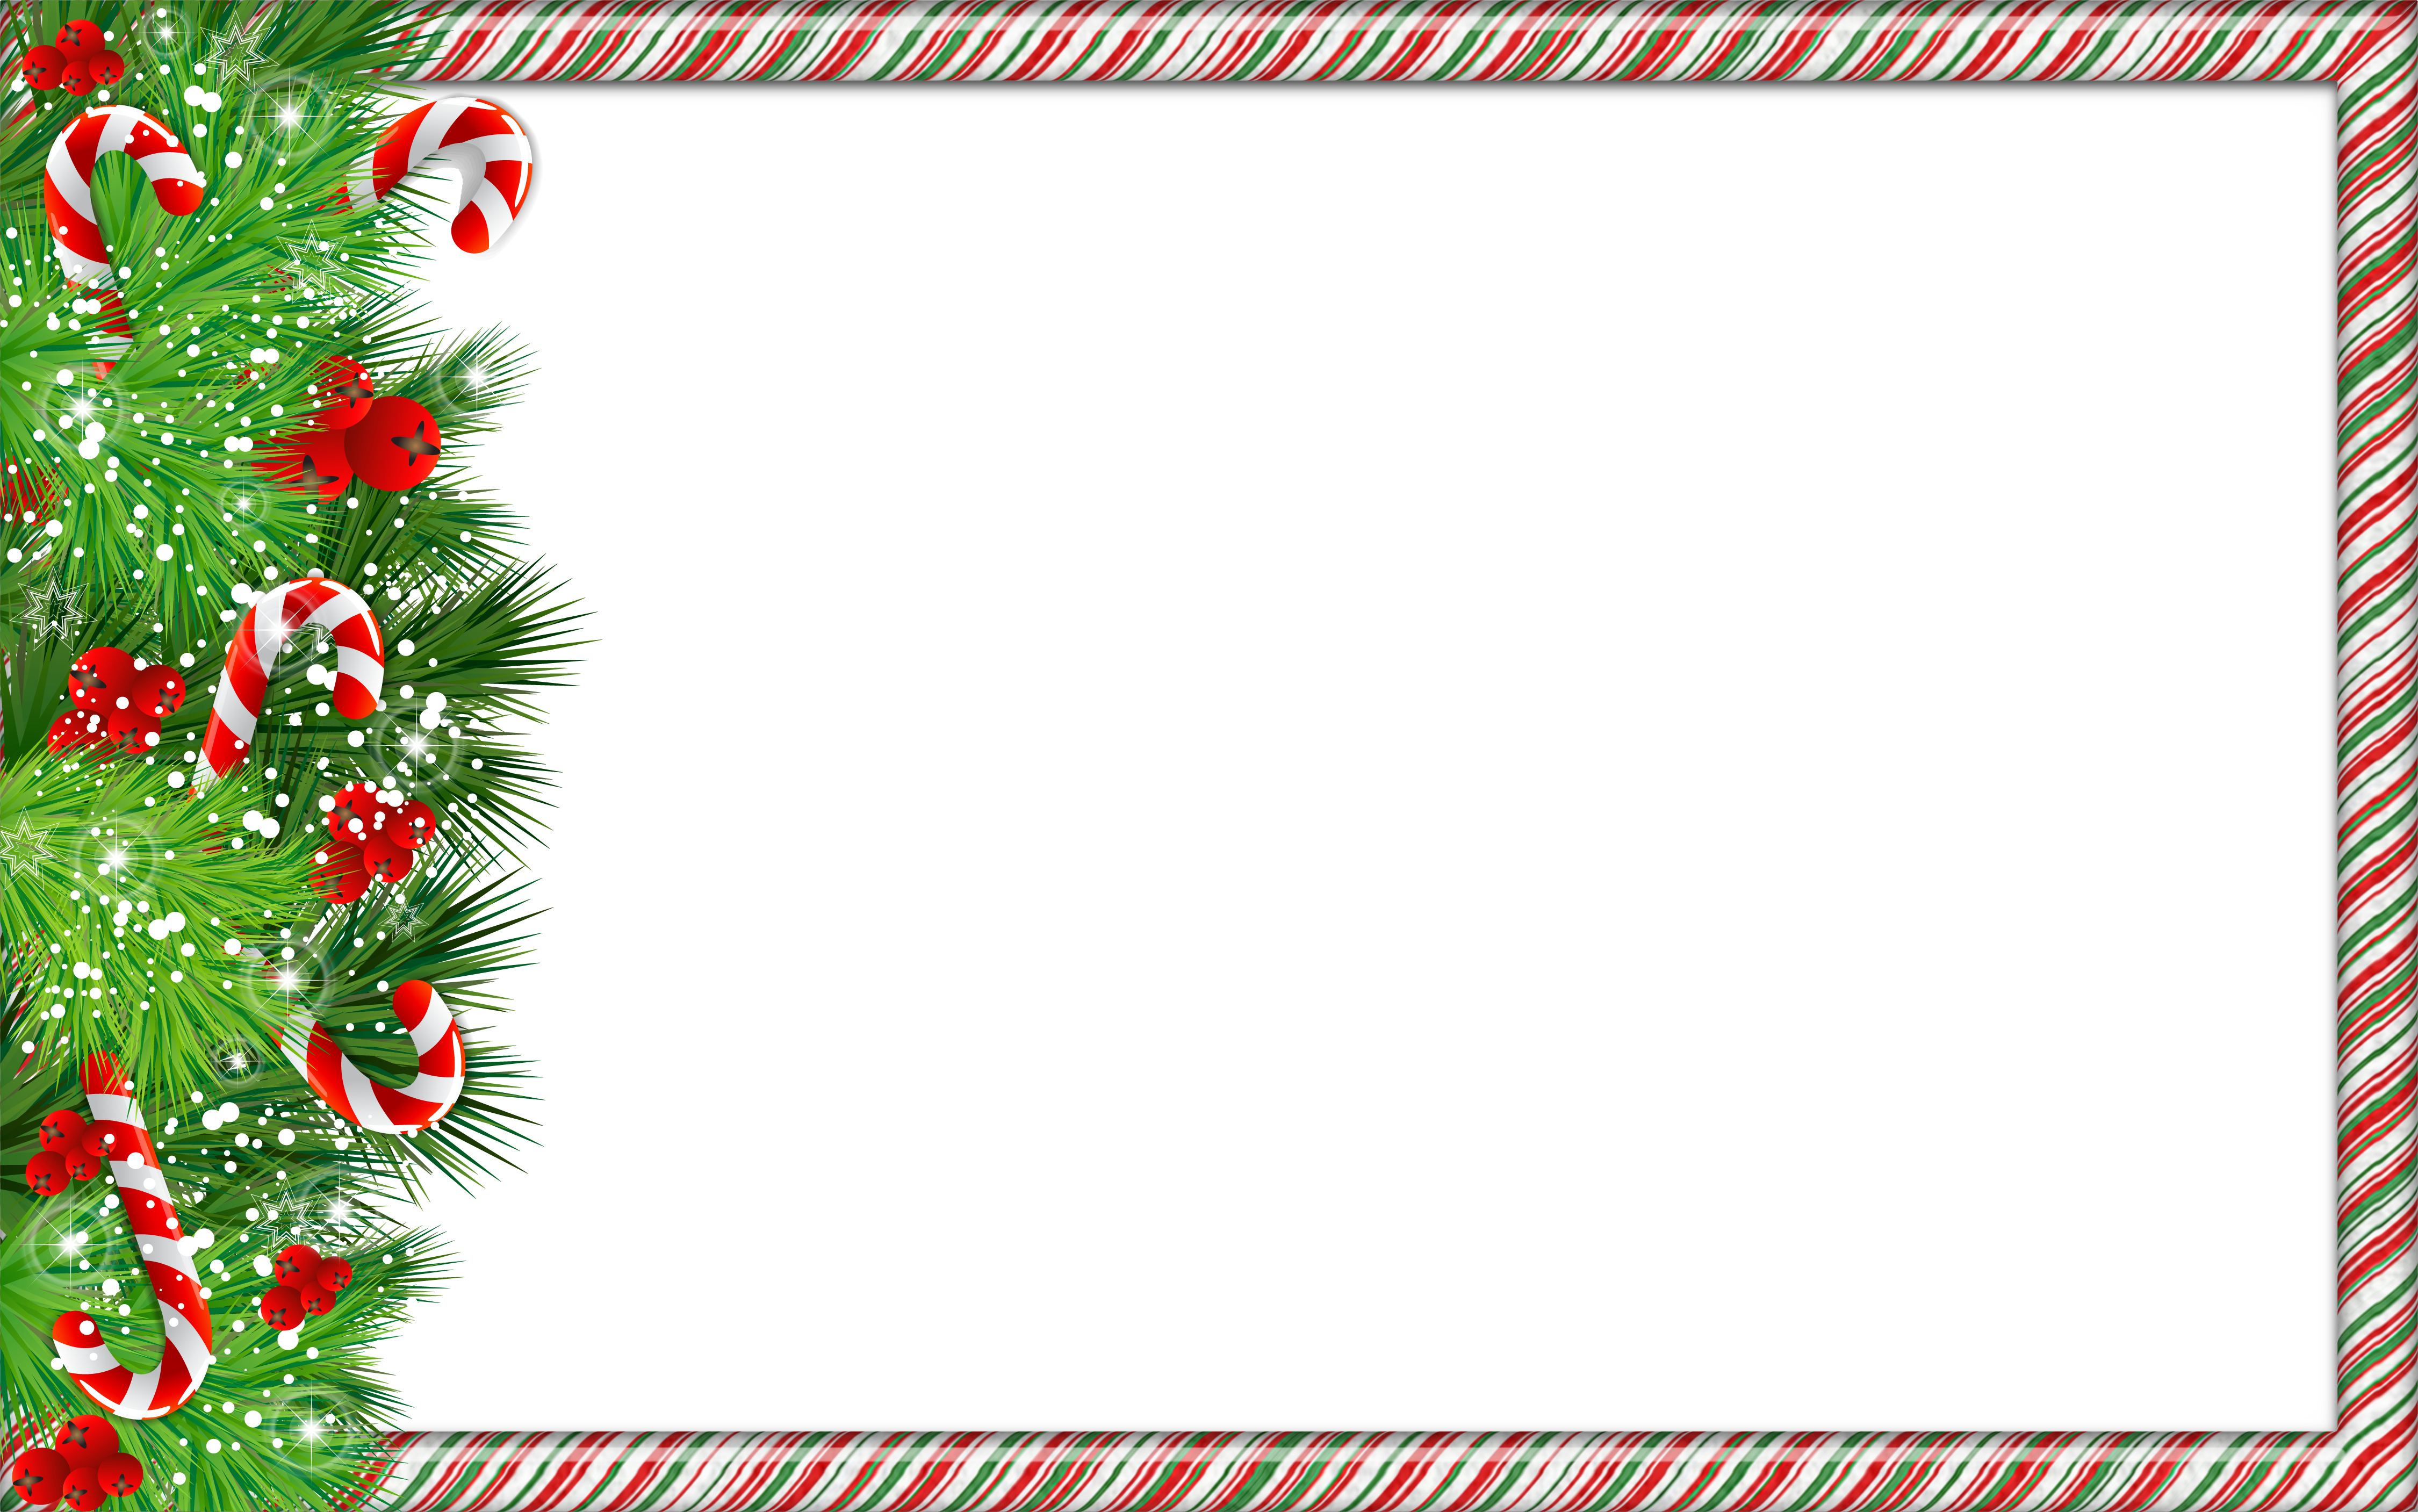 Christmas png photo frame. Garland clipart candy